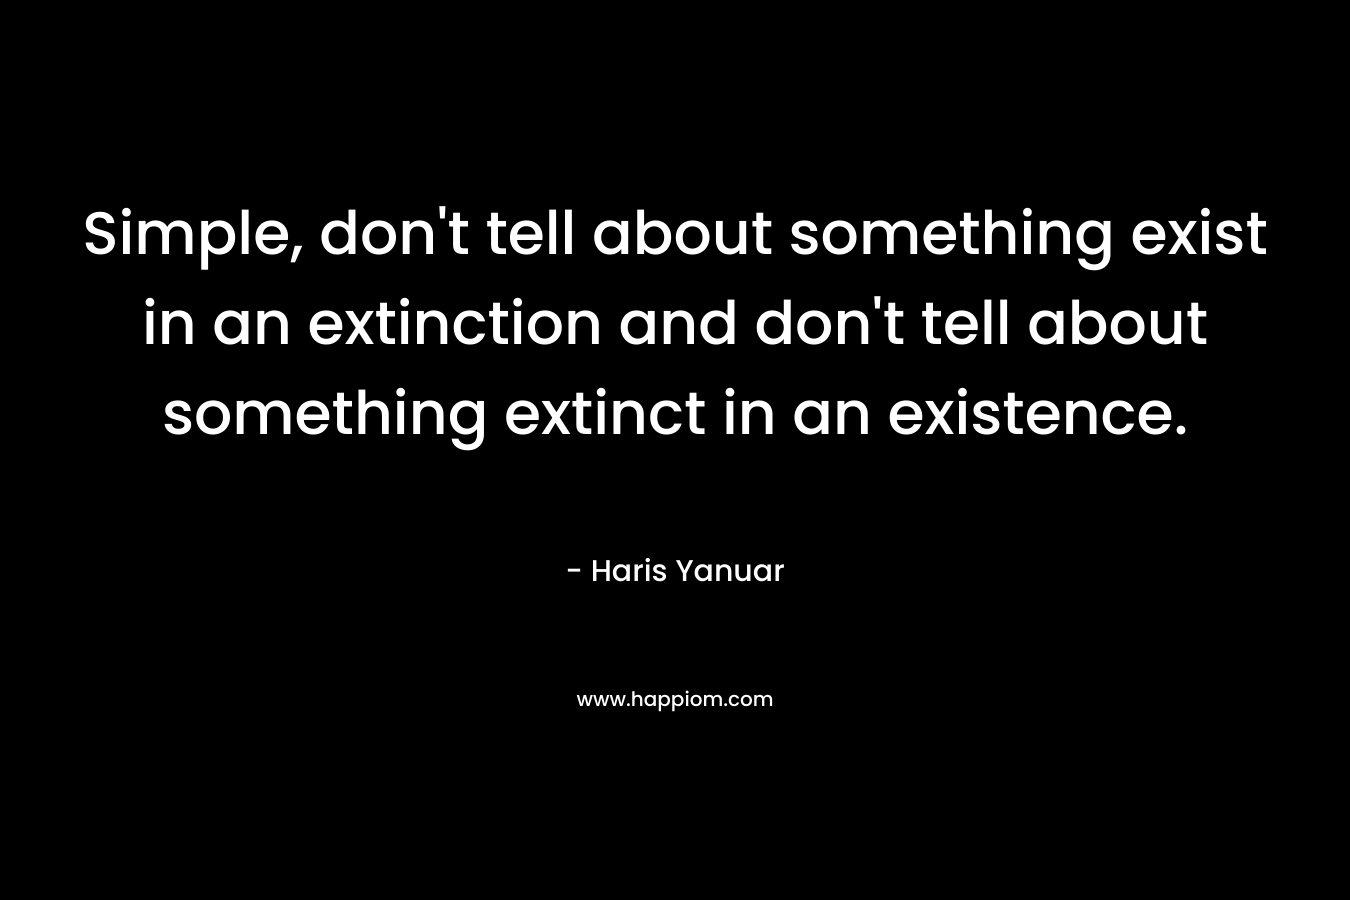 Simple, don’t tell about something exist in an extinction and don’t tell about something extinct in an existence. – Haris Yanuar